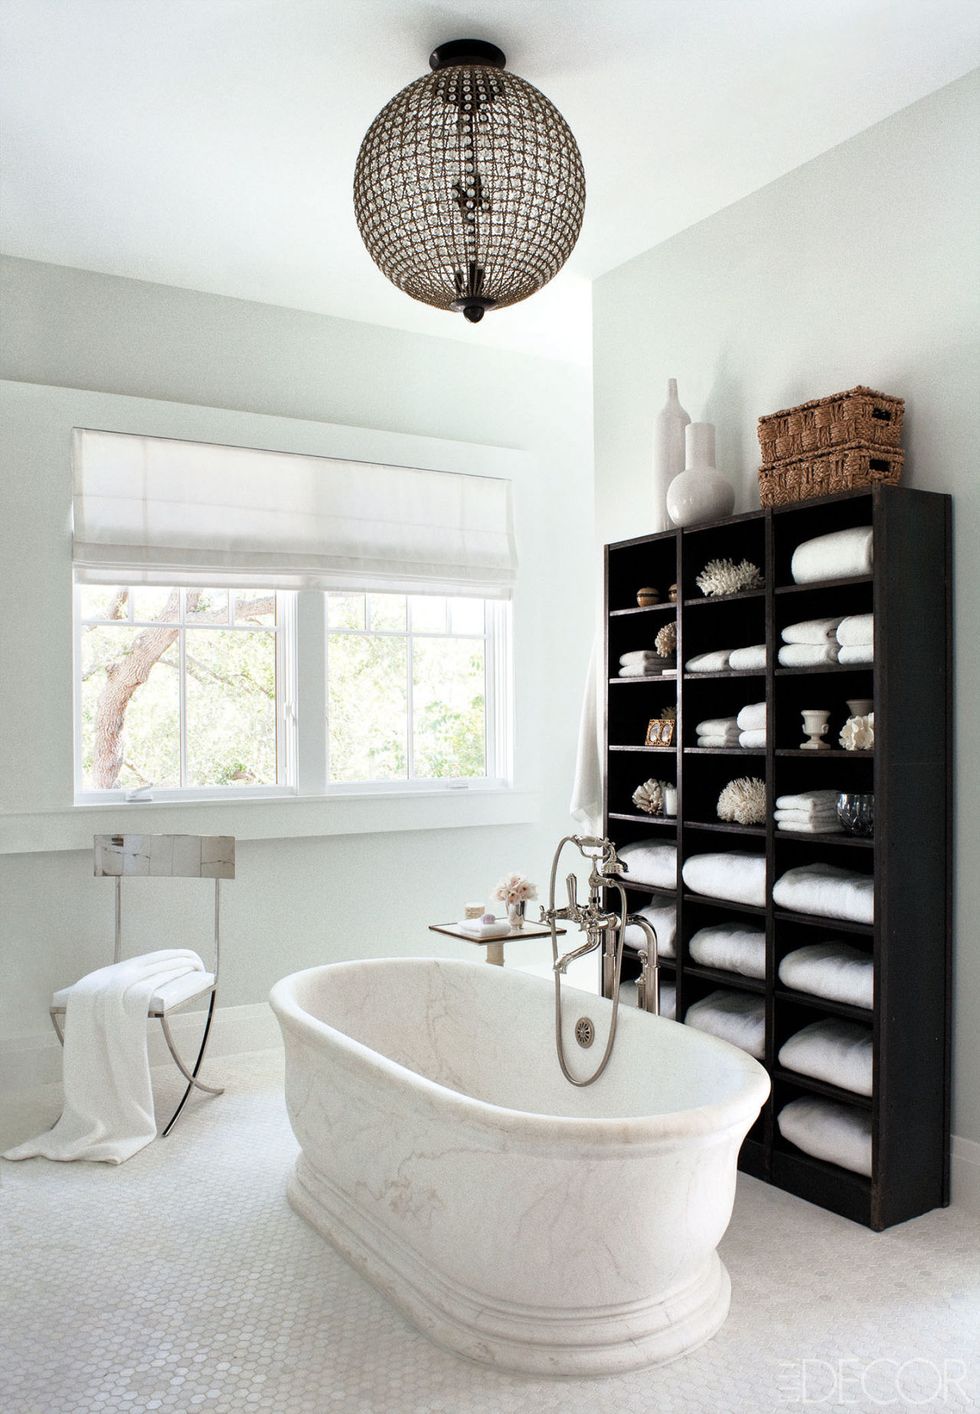 10 great bathroom storage ideas and trends - The Interiors Addict